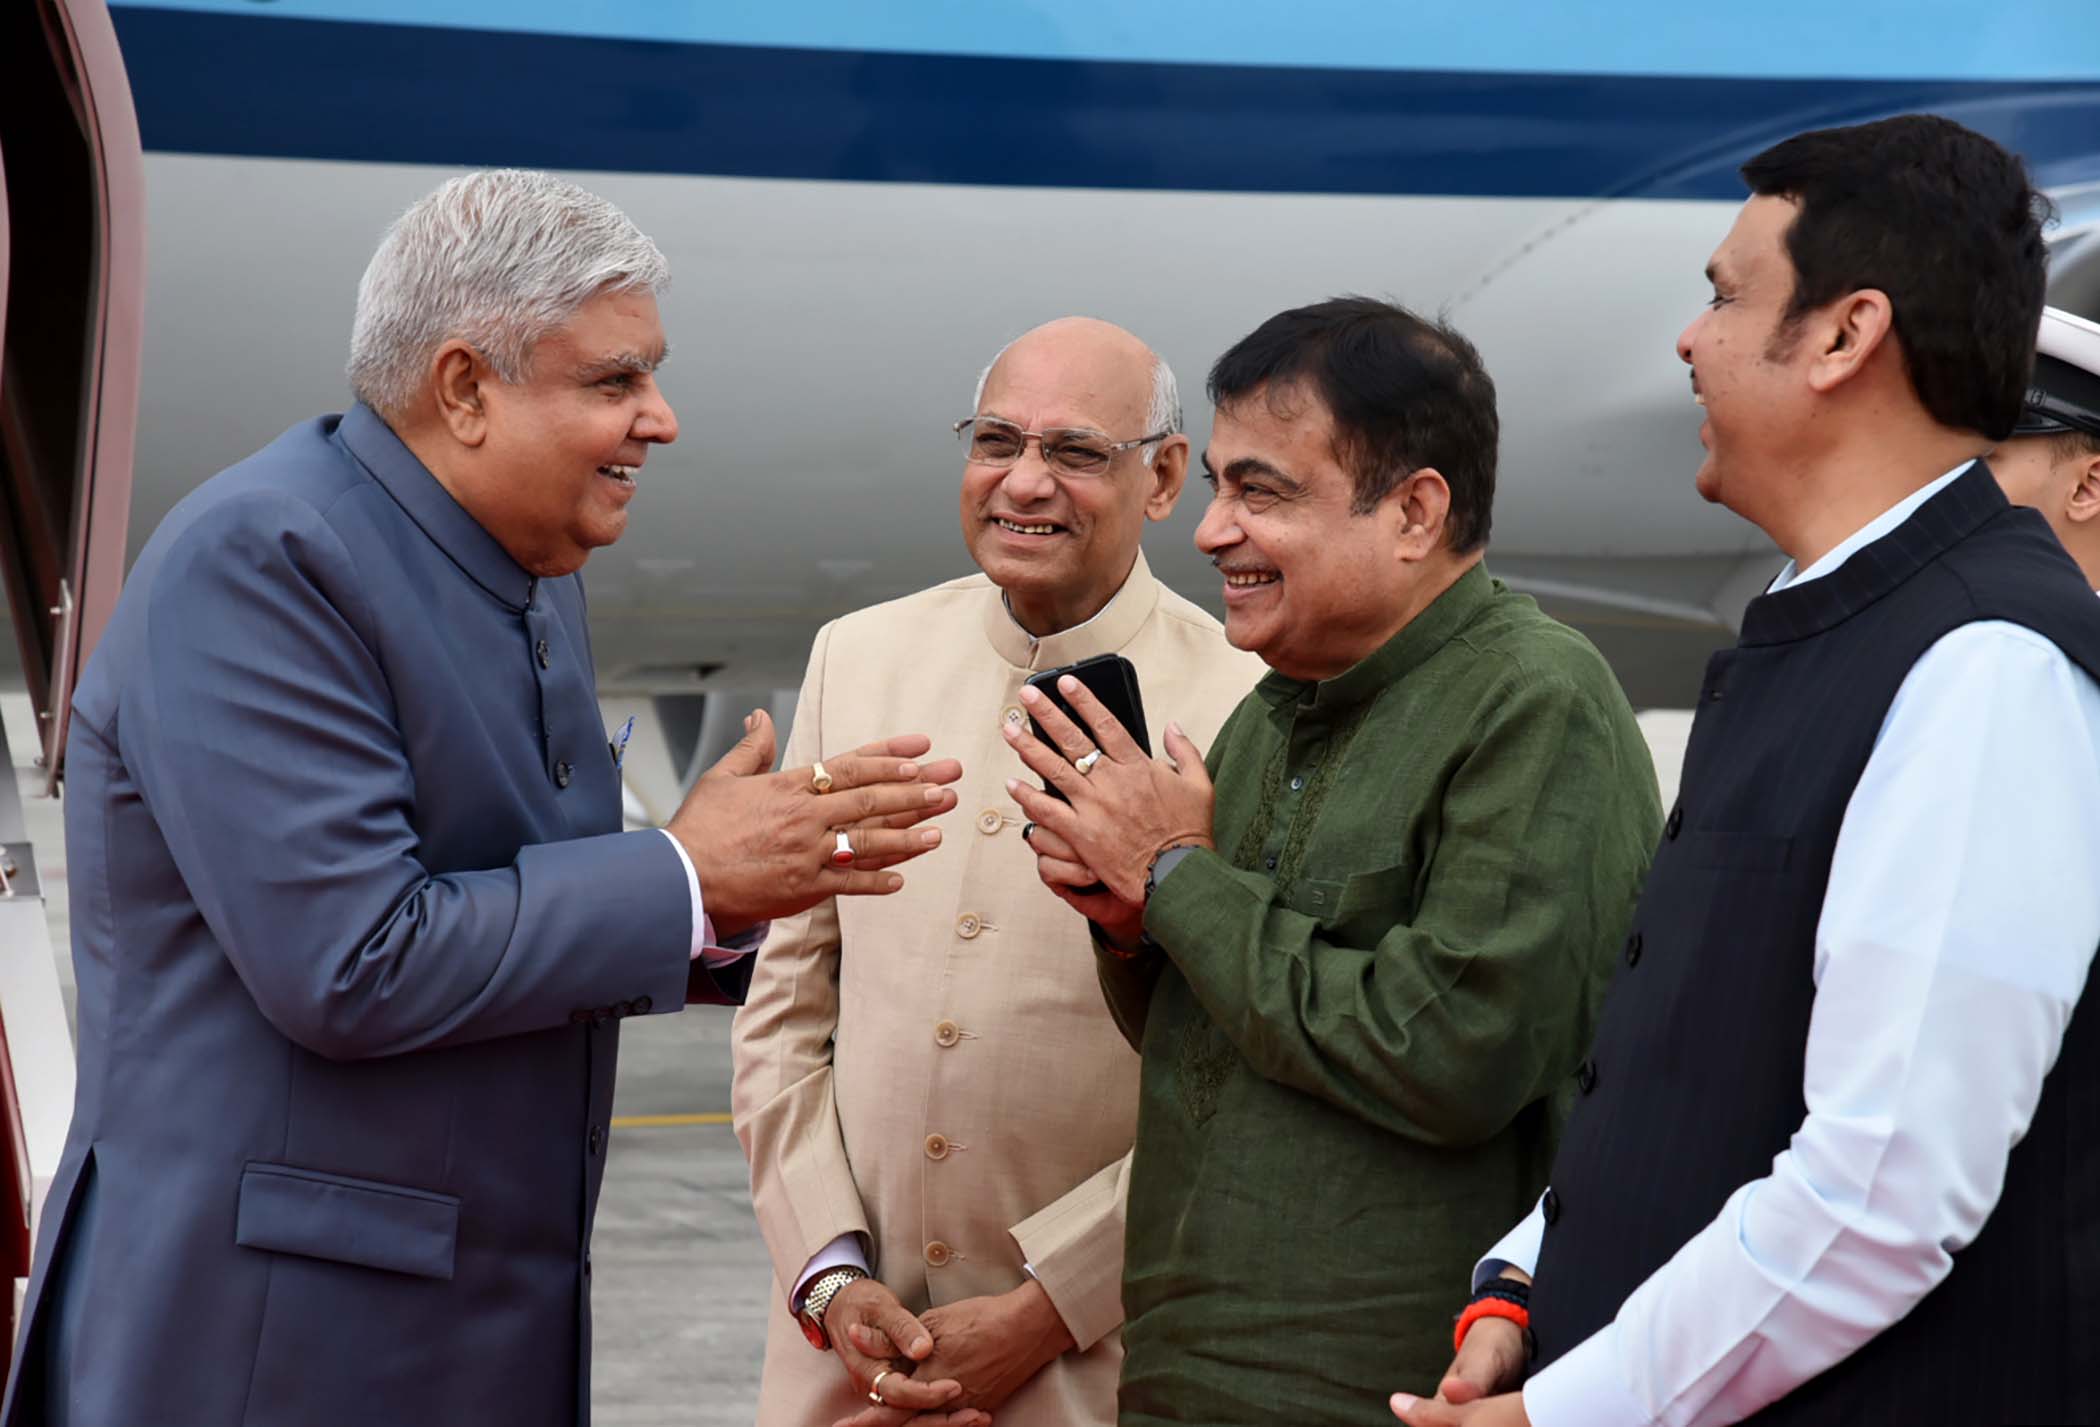 The Vice President, Shri Jagdeep Dhankhar and Dr Sudesh Dhankhar being welcomed by the Governor of Maharashtra, Shri Ramesh Bais, Union Minister of Road Transport & Highways, Shri Nitin Gadkari, Deputy Chief Minister of Maharashtra, Shri Devendra Fadnavis, and other dignitaries on their arrival in Nagpur, Maharashtra on August 4, 2023.